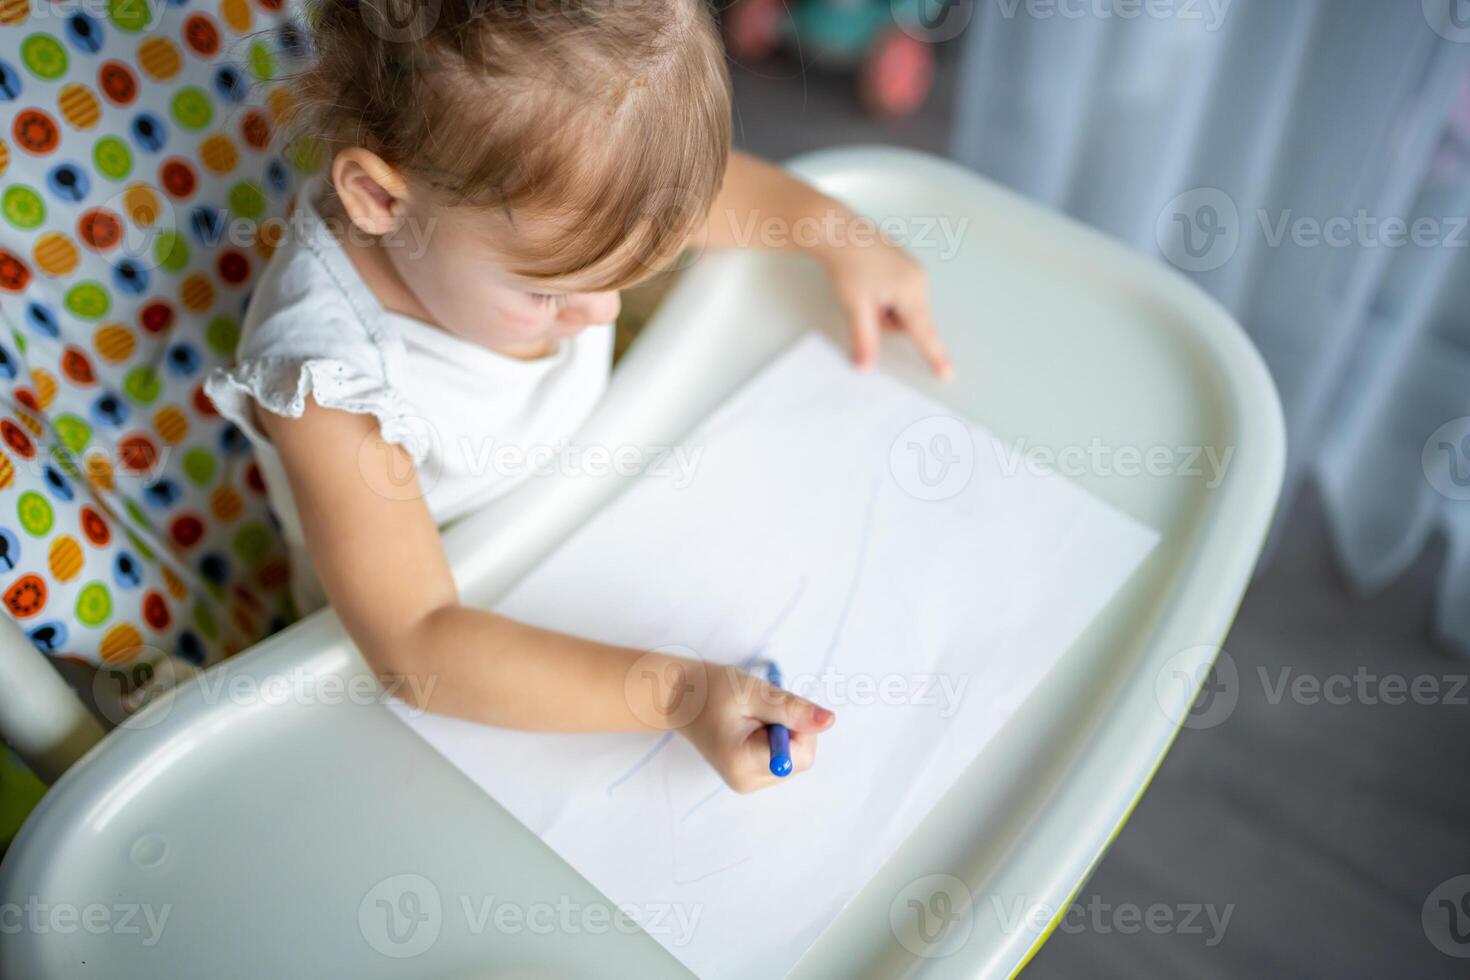 Cute little girl painting with felt-tip pen at home. Creative games for kids. Stay at home entertainment photo